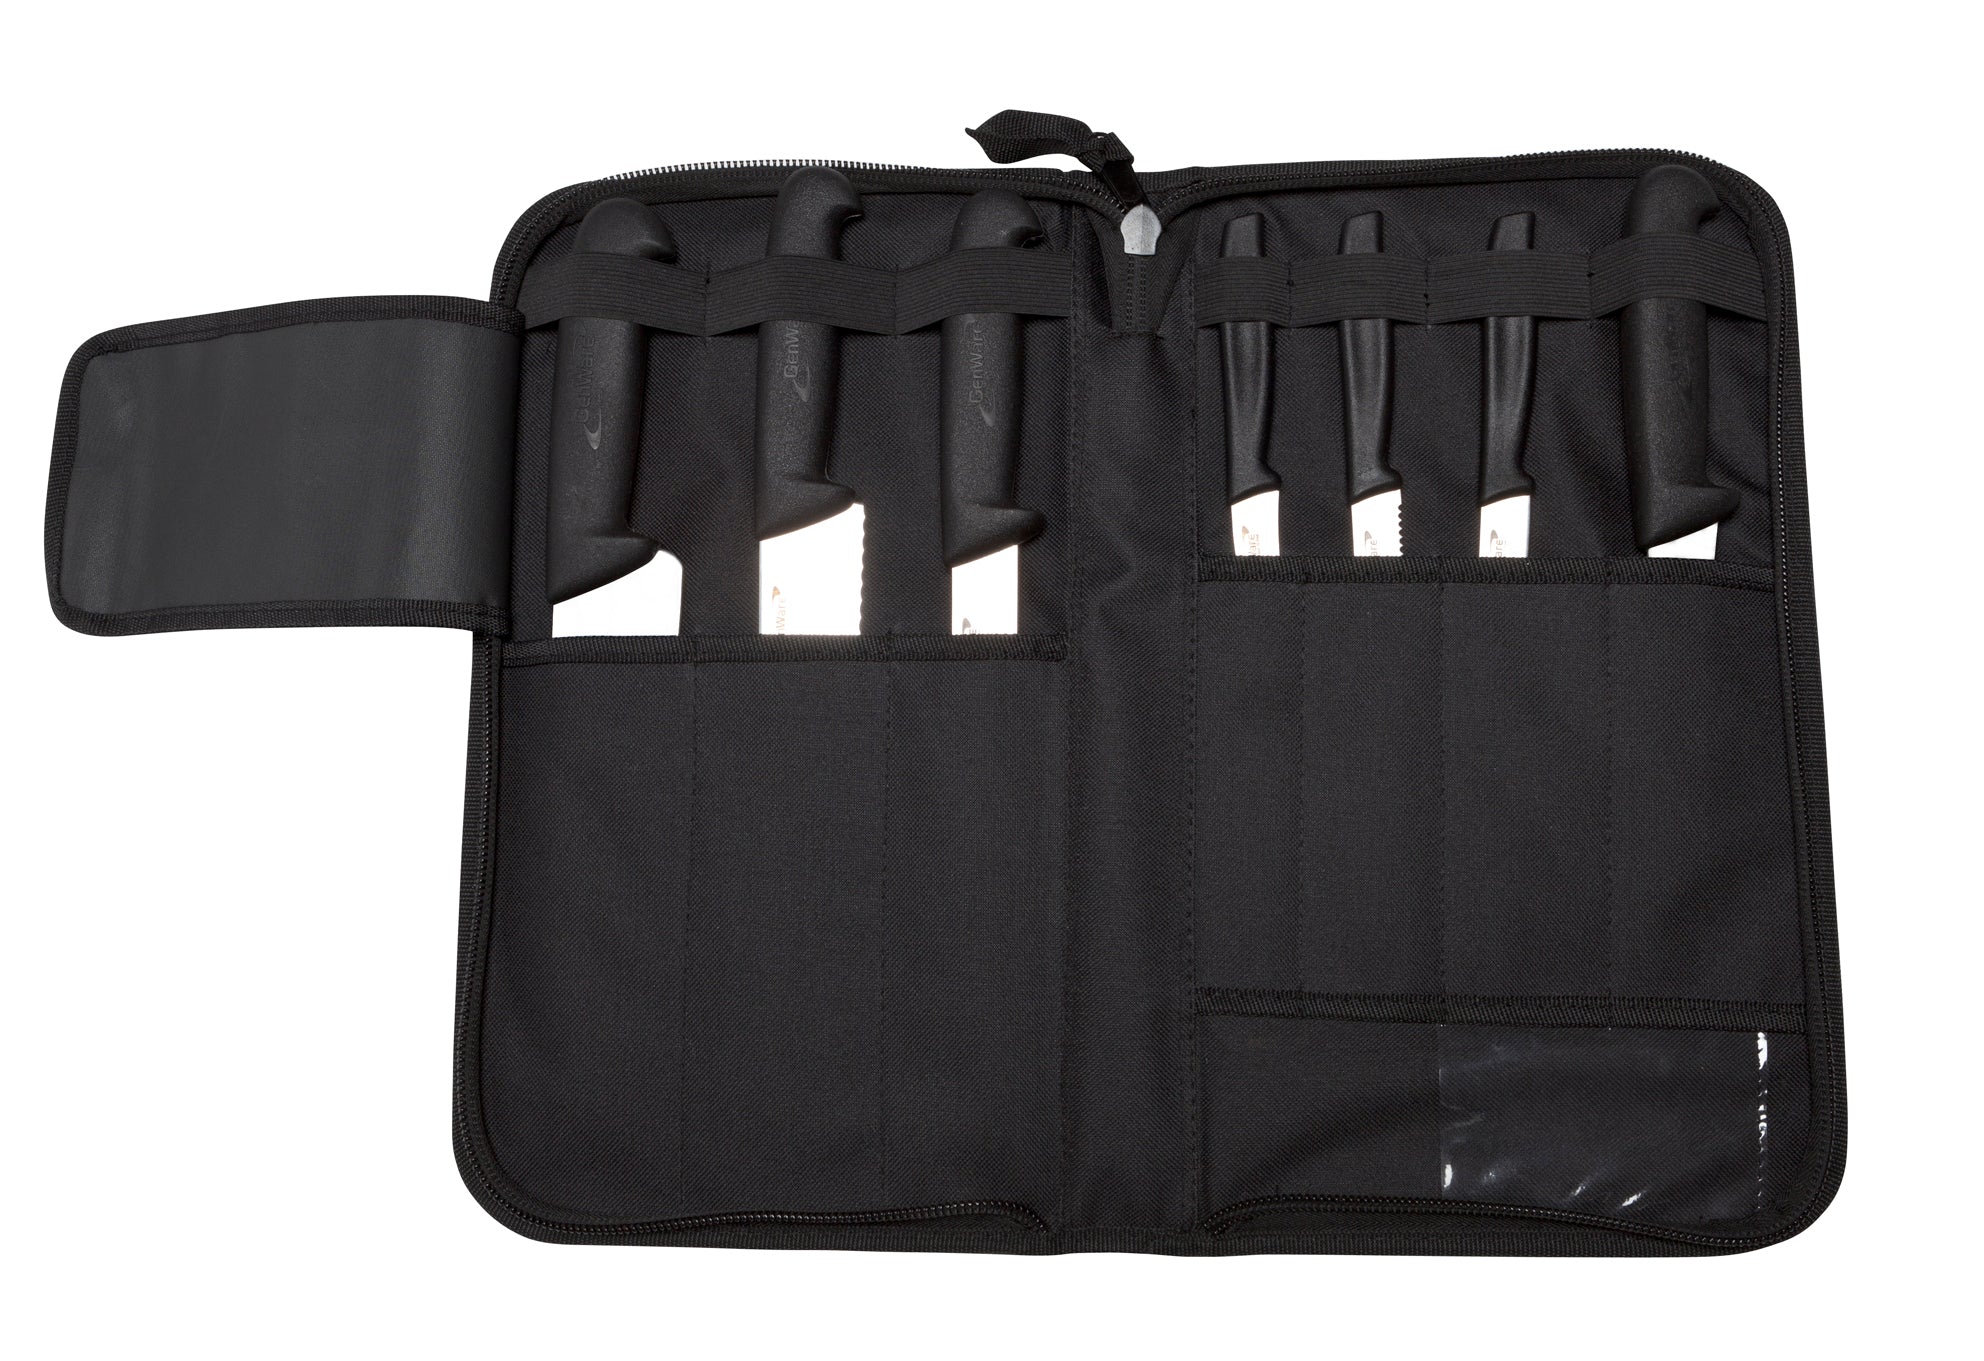 Genware Knife Case - 7 Compartment